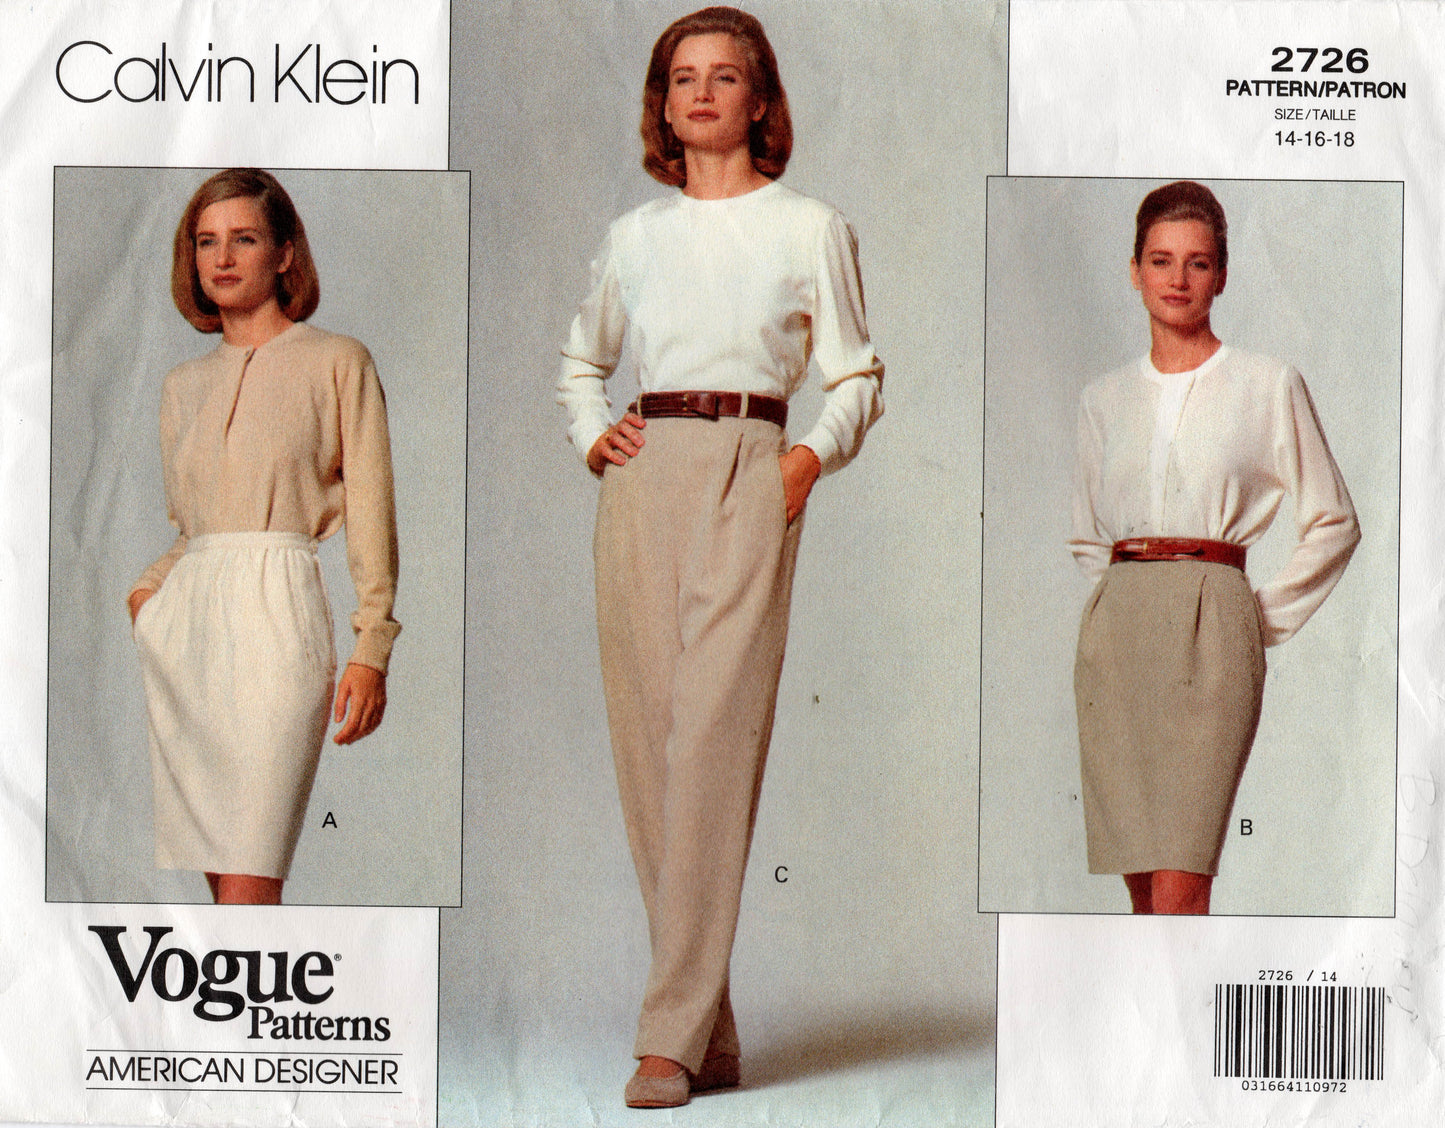 Vogue American Designer 2726 CALVIN KLEIN Womens Classic Skirts & Pants 1990s Vintage Sewing Pattern Size 14 - 18 UNCUT Factory Folded